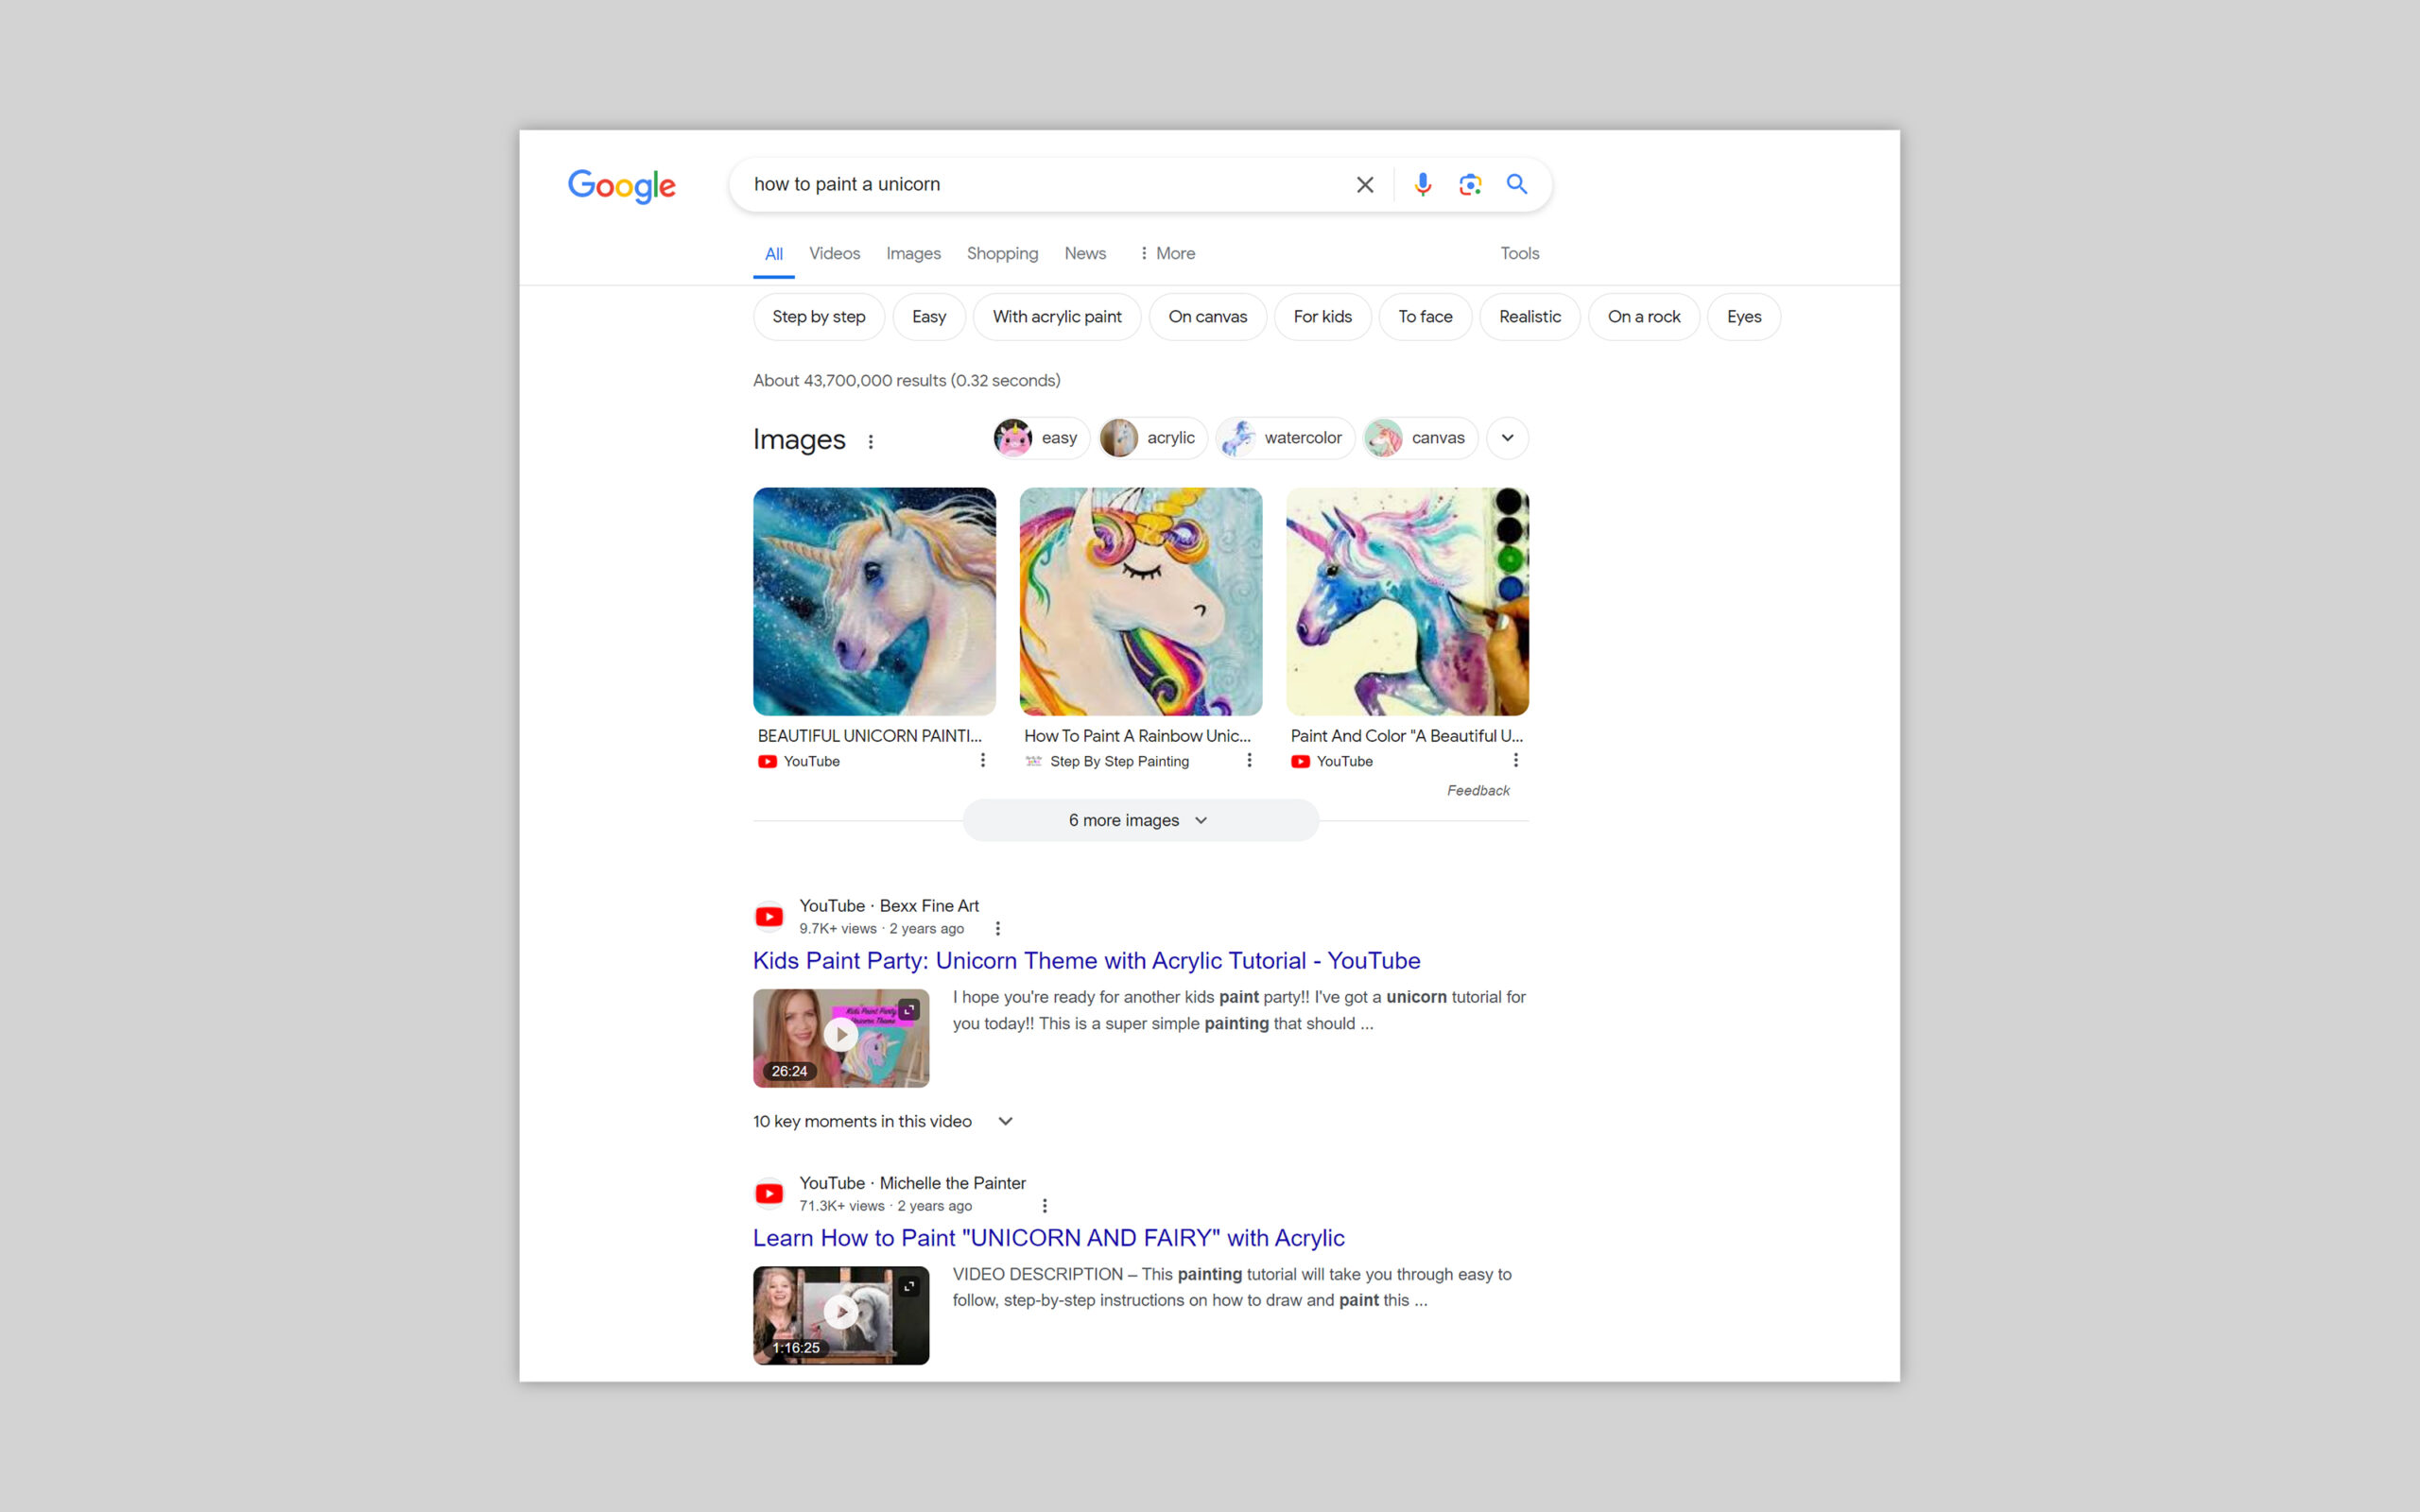 Screenshot of the Google search results for 'how to paint a unicorn' demonstrating several locations you can rank.